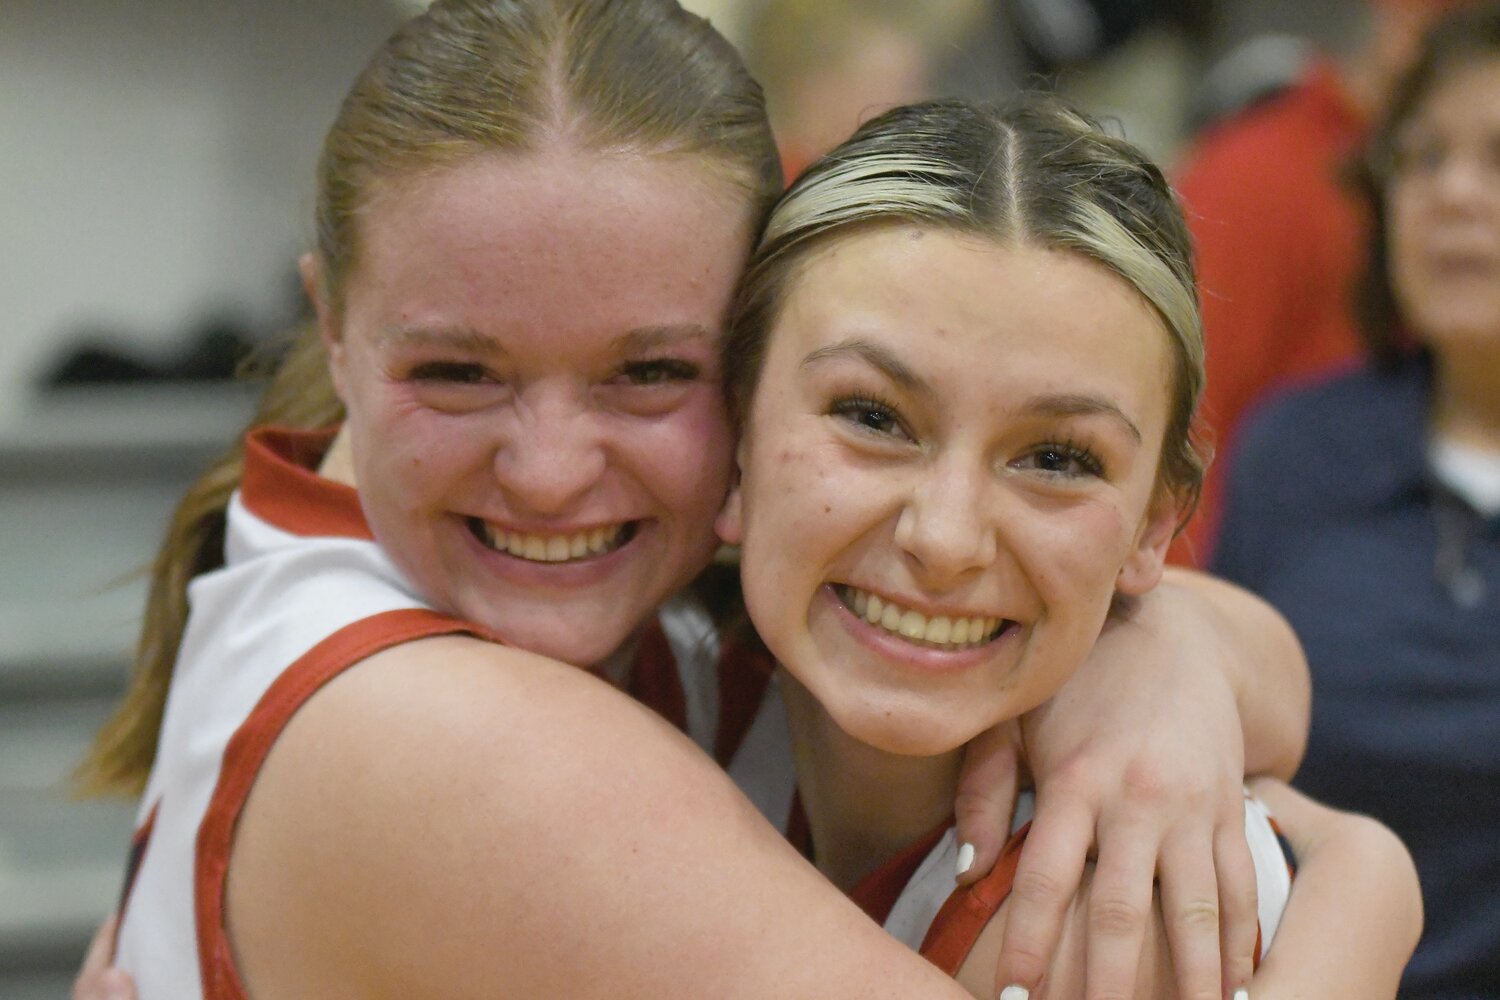 Lady Devils Rhyen Debenham (left) and Jacey Bardsley have been basketball teammates since they were kids, and have overcome adversity all through their years at EHS, including four different head coaches in four years. The bond they share is unbreakable.